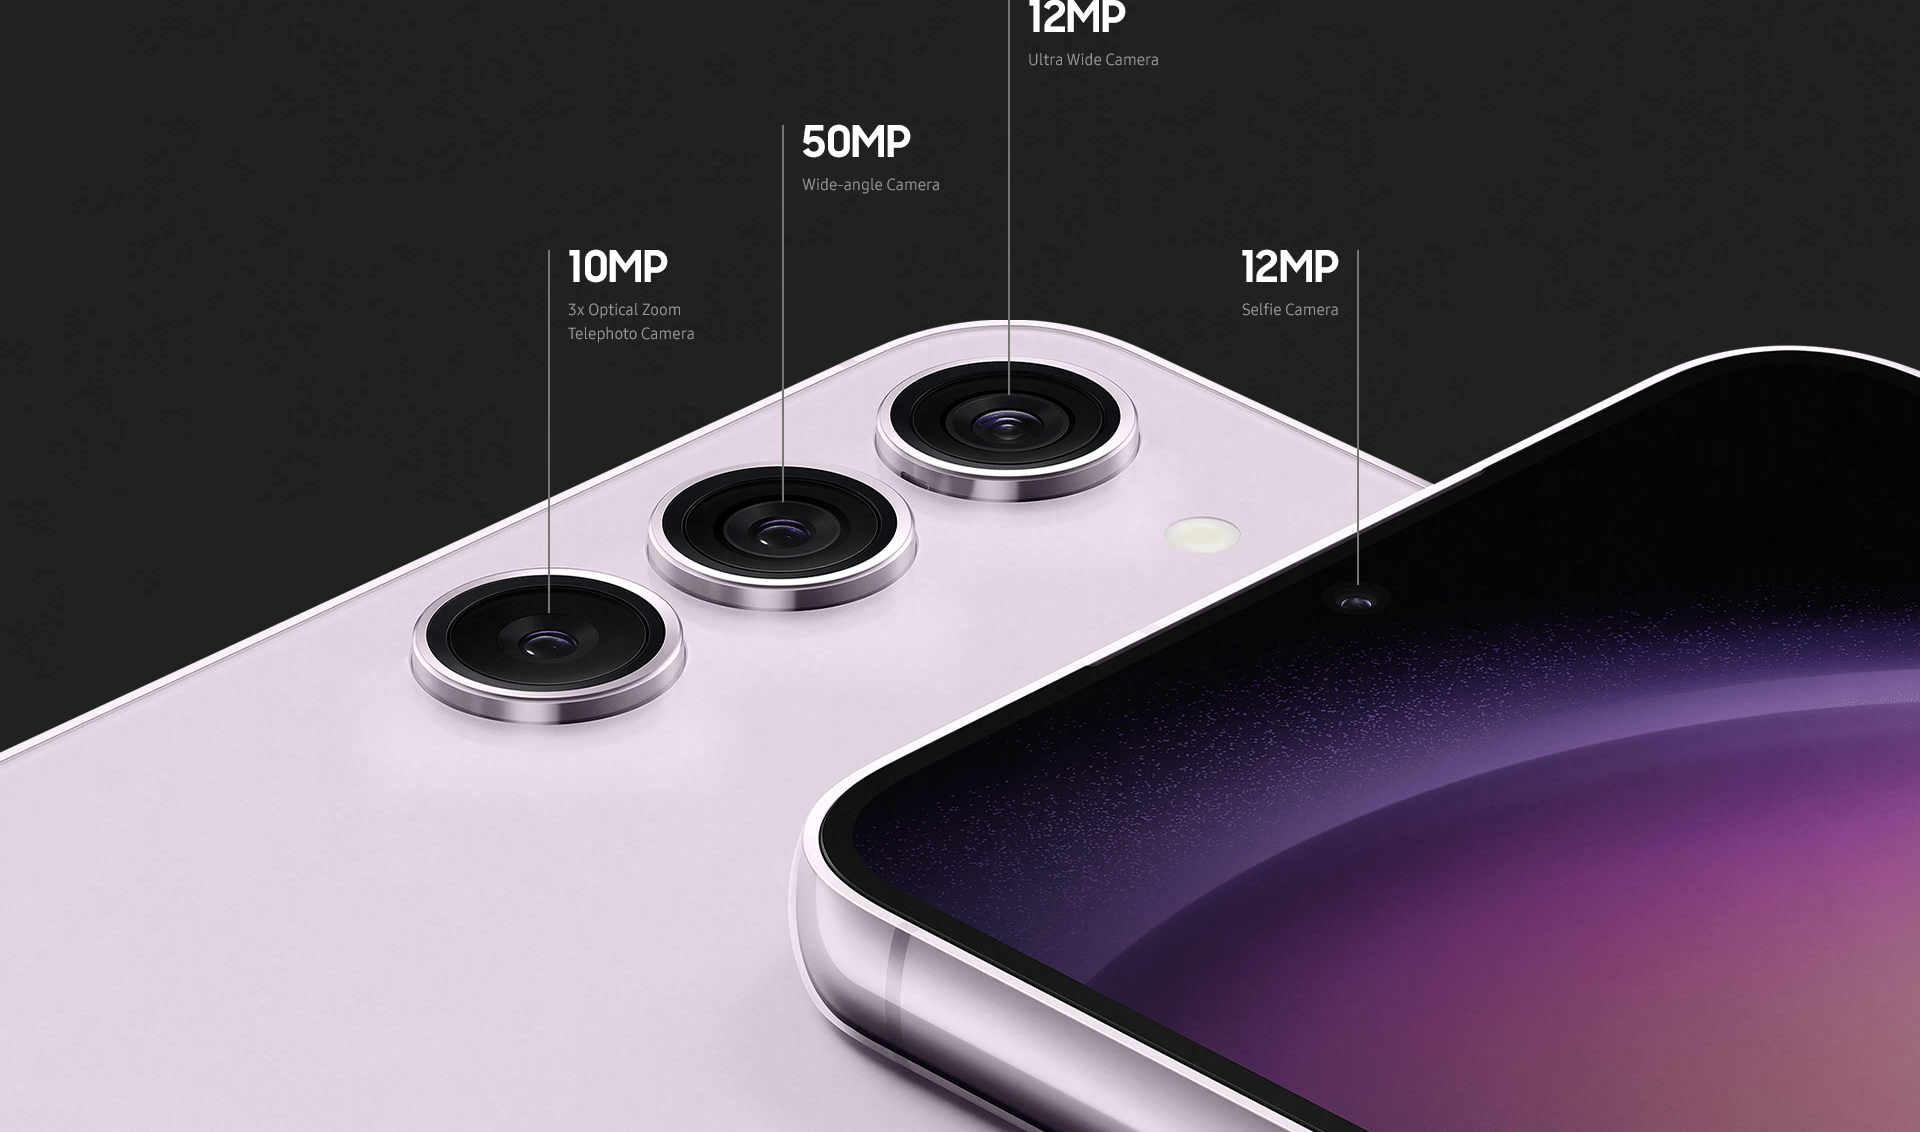 Zoomed-in image showing the three cameras on the back and the selfie camera on the front.